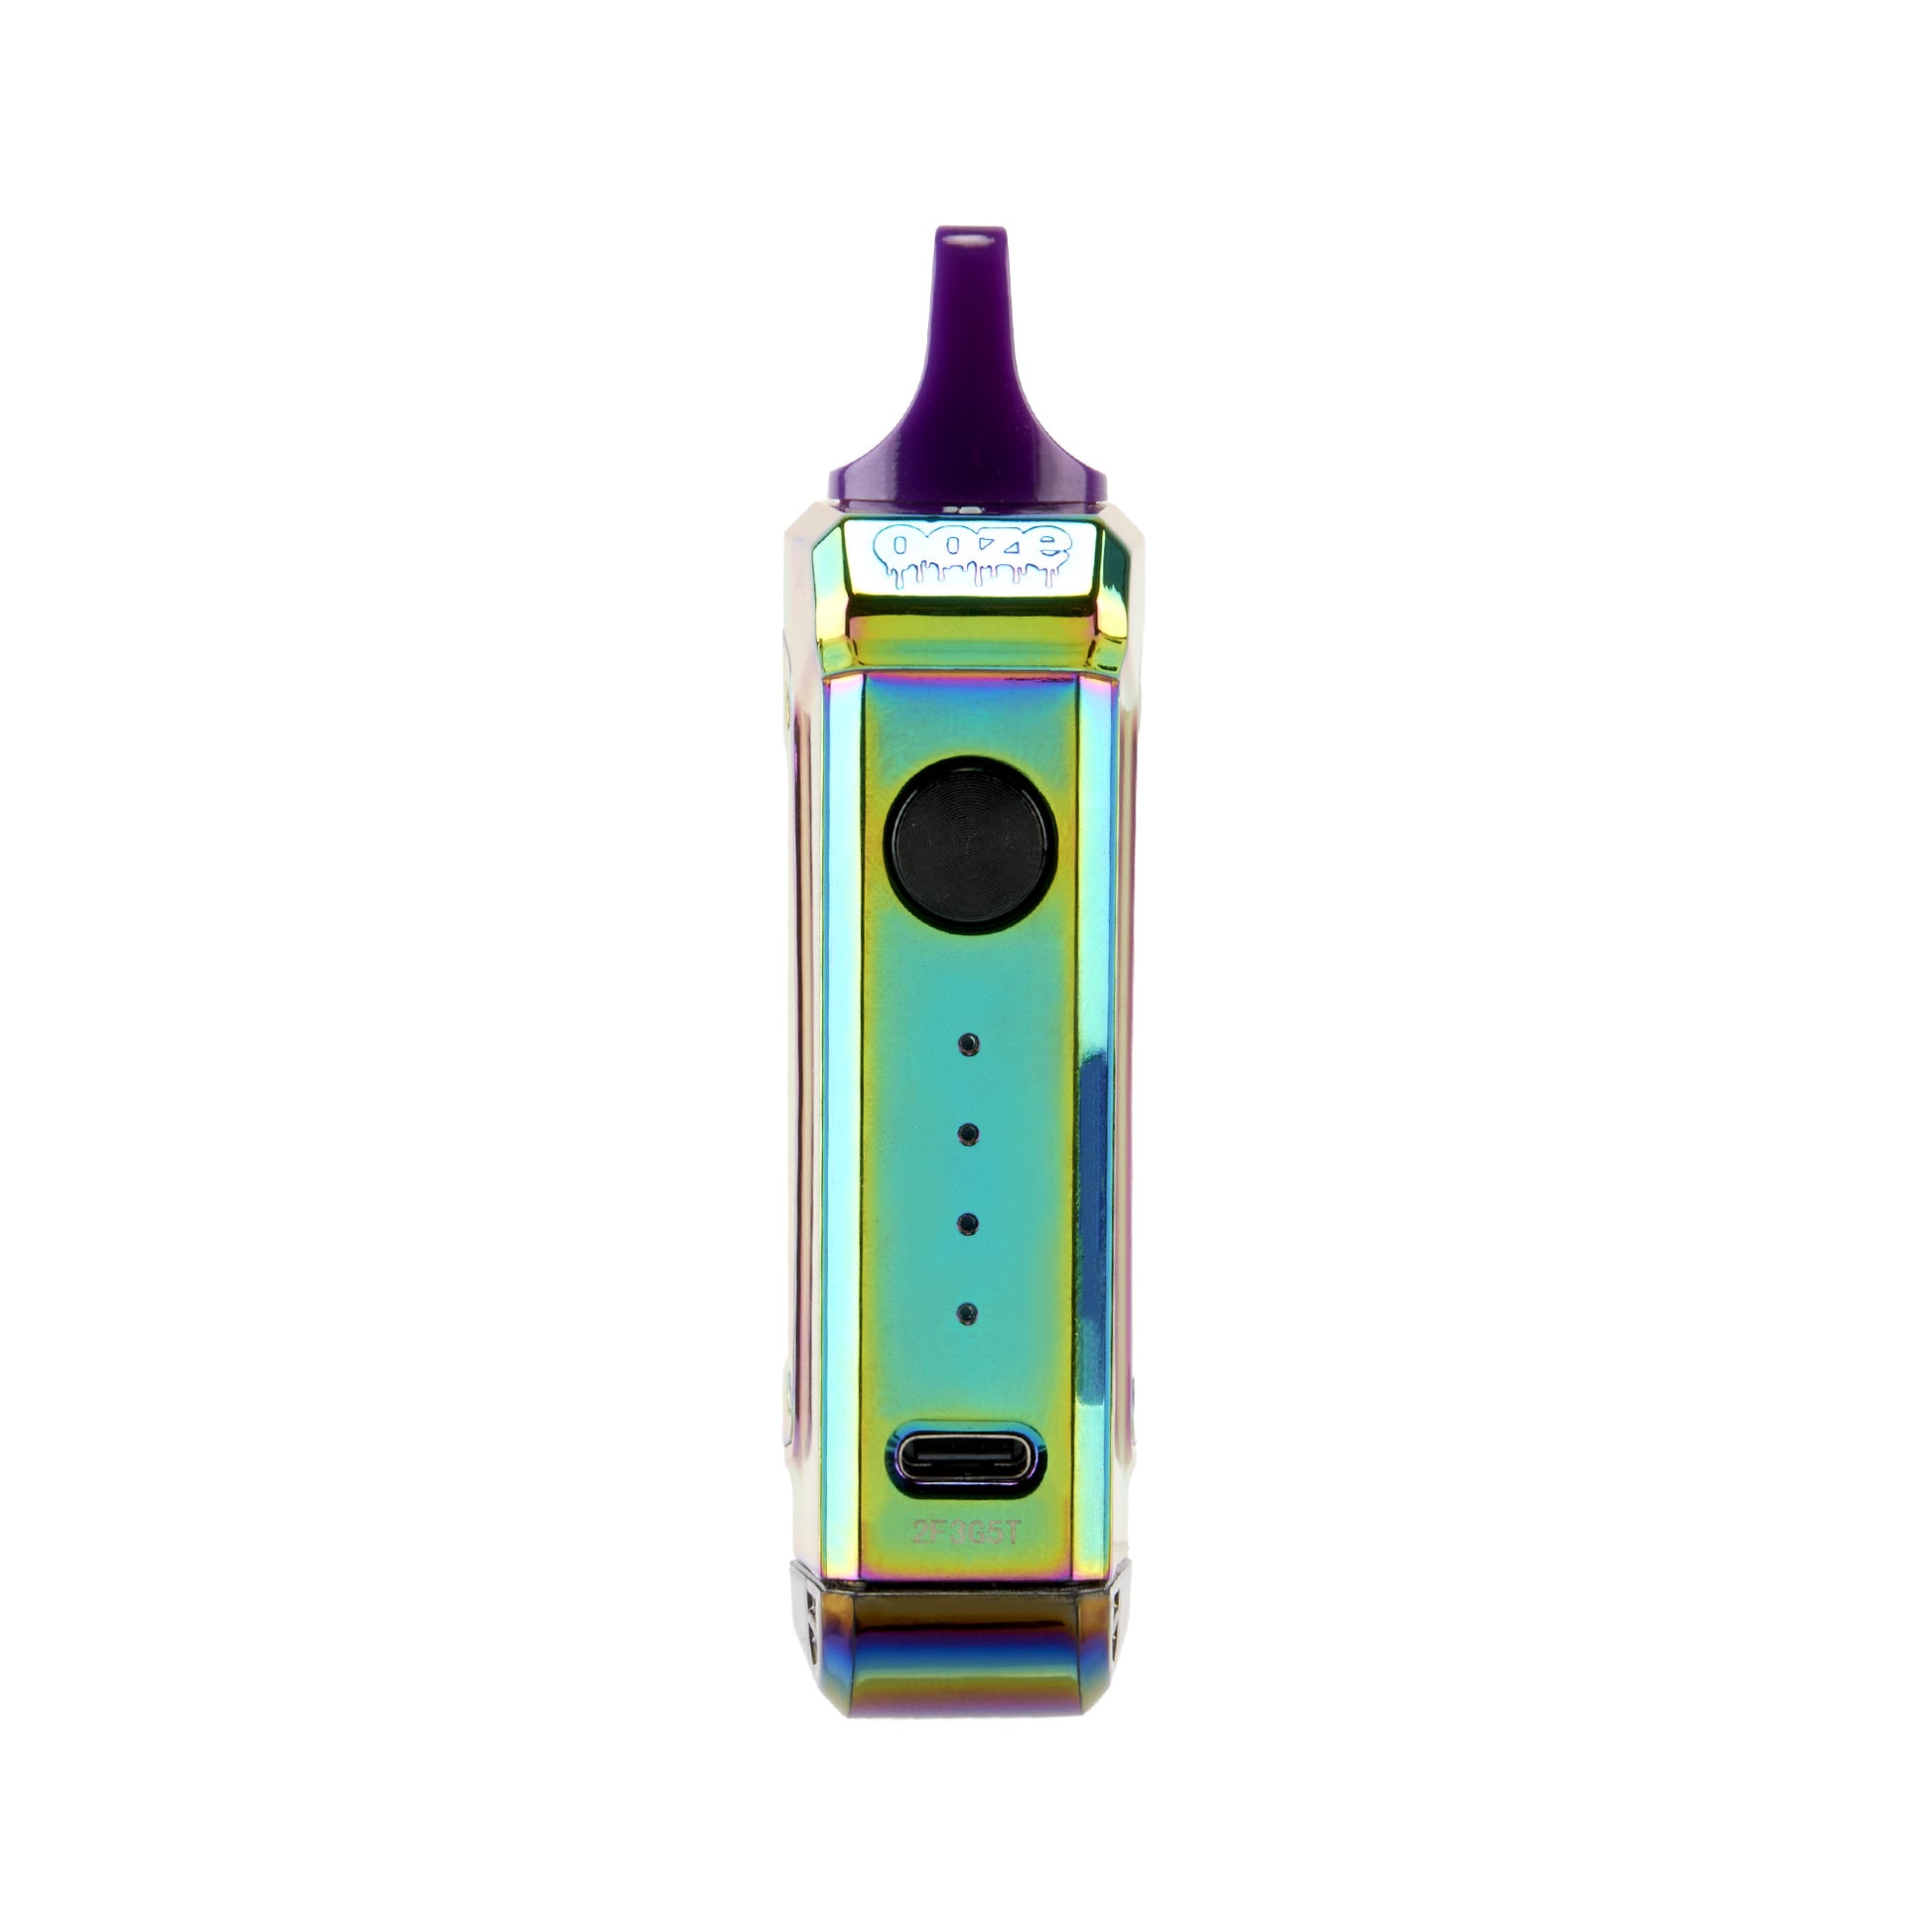 The rainbow Ooze Duplex 2 extract vape has the magnetic plate removed to show the interface